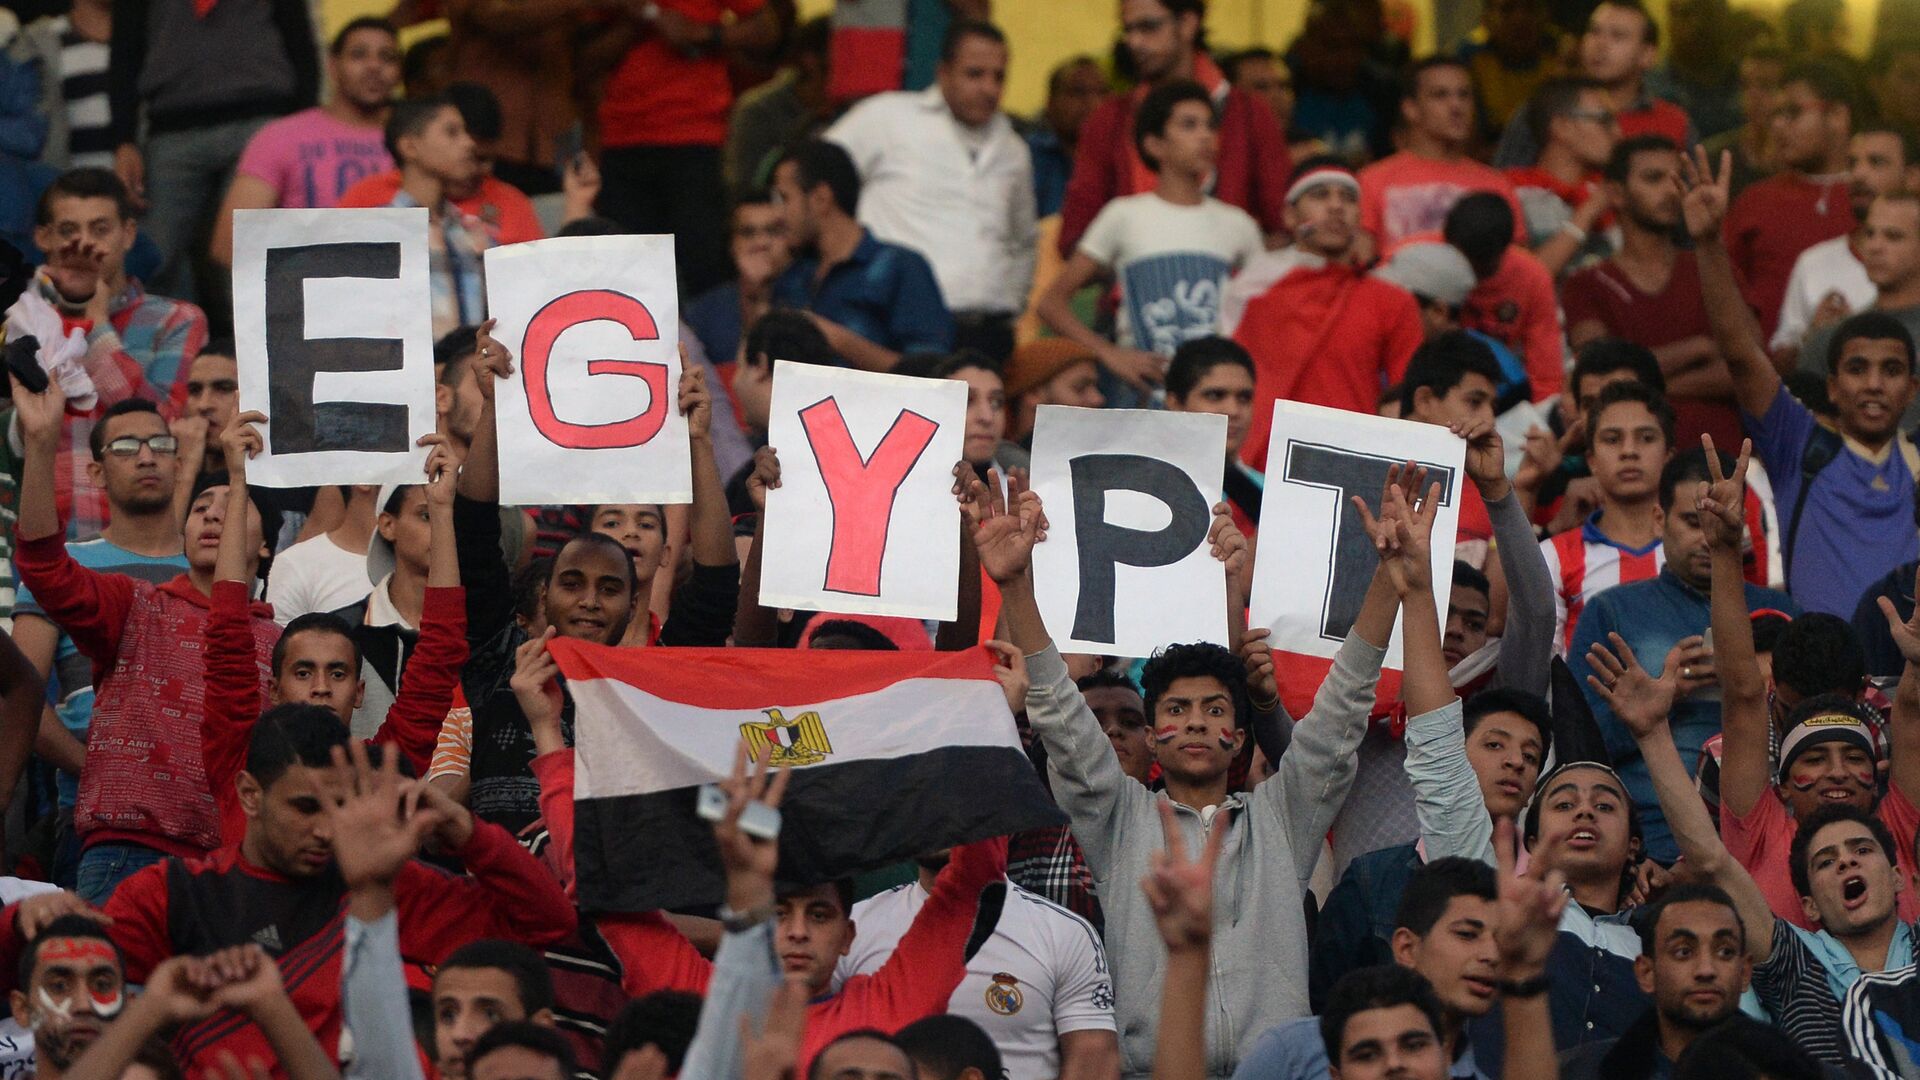 Egyptian fans carry placards and the national flag ahead of the match between Egypt and Senegal during the Africa Cup of Nations group G football match at the Cairo International Stadium in the Egyptian capital on November 15, 2014 - اسپوتنیک افغانستان  , 1920, 07.02.2022